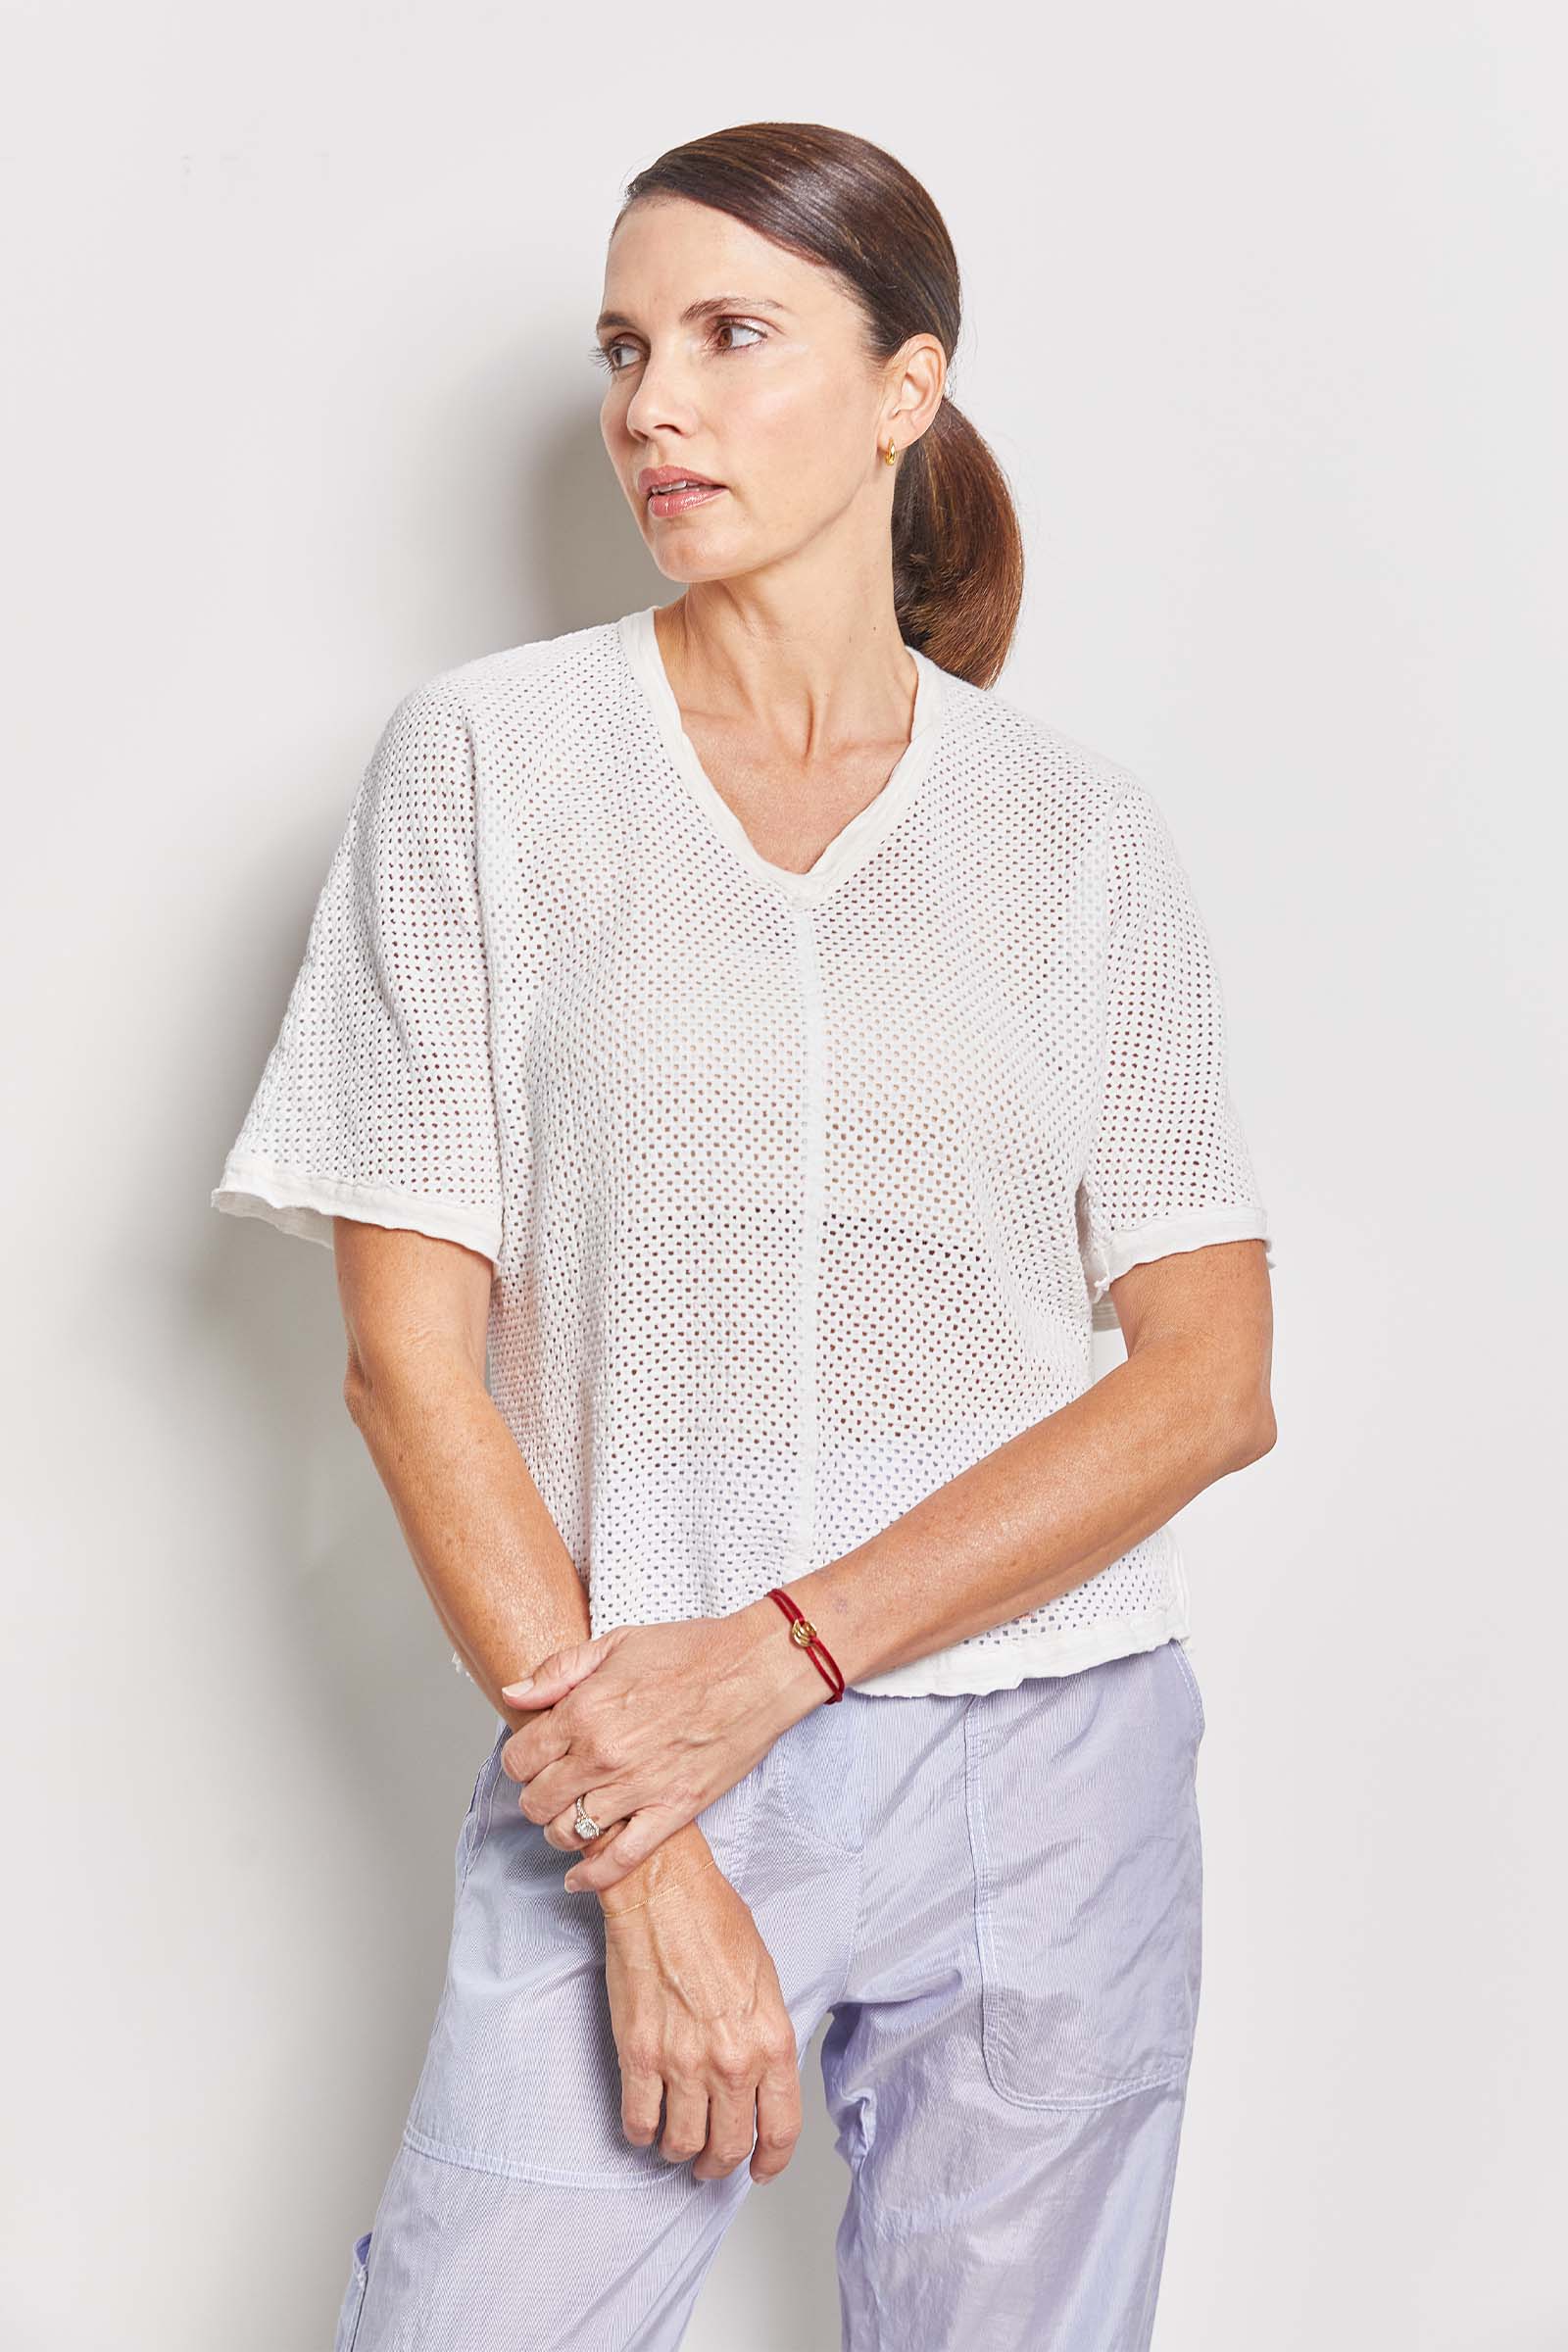 byfreer mette cambric cotton mesh tee.